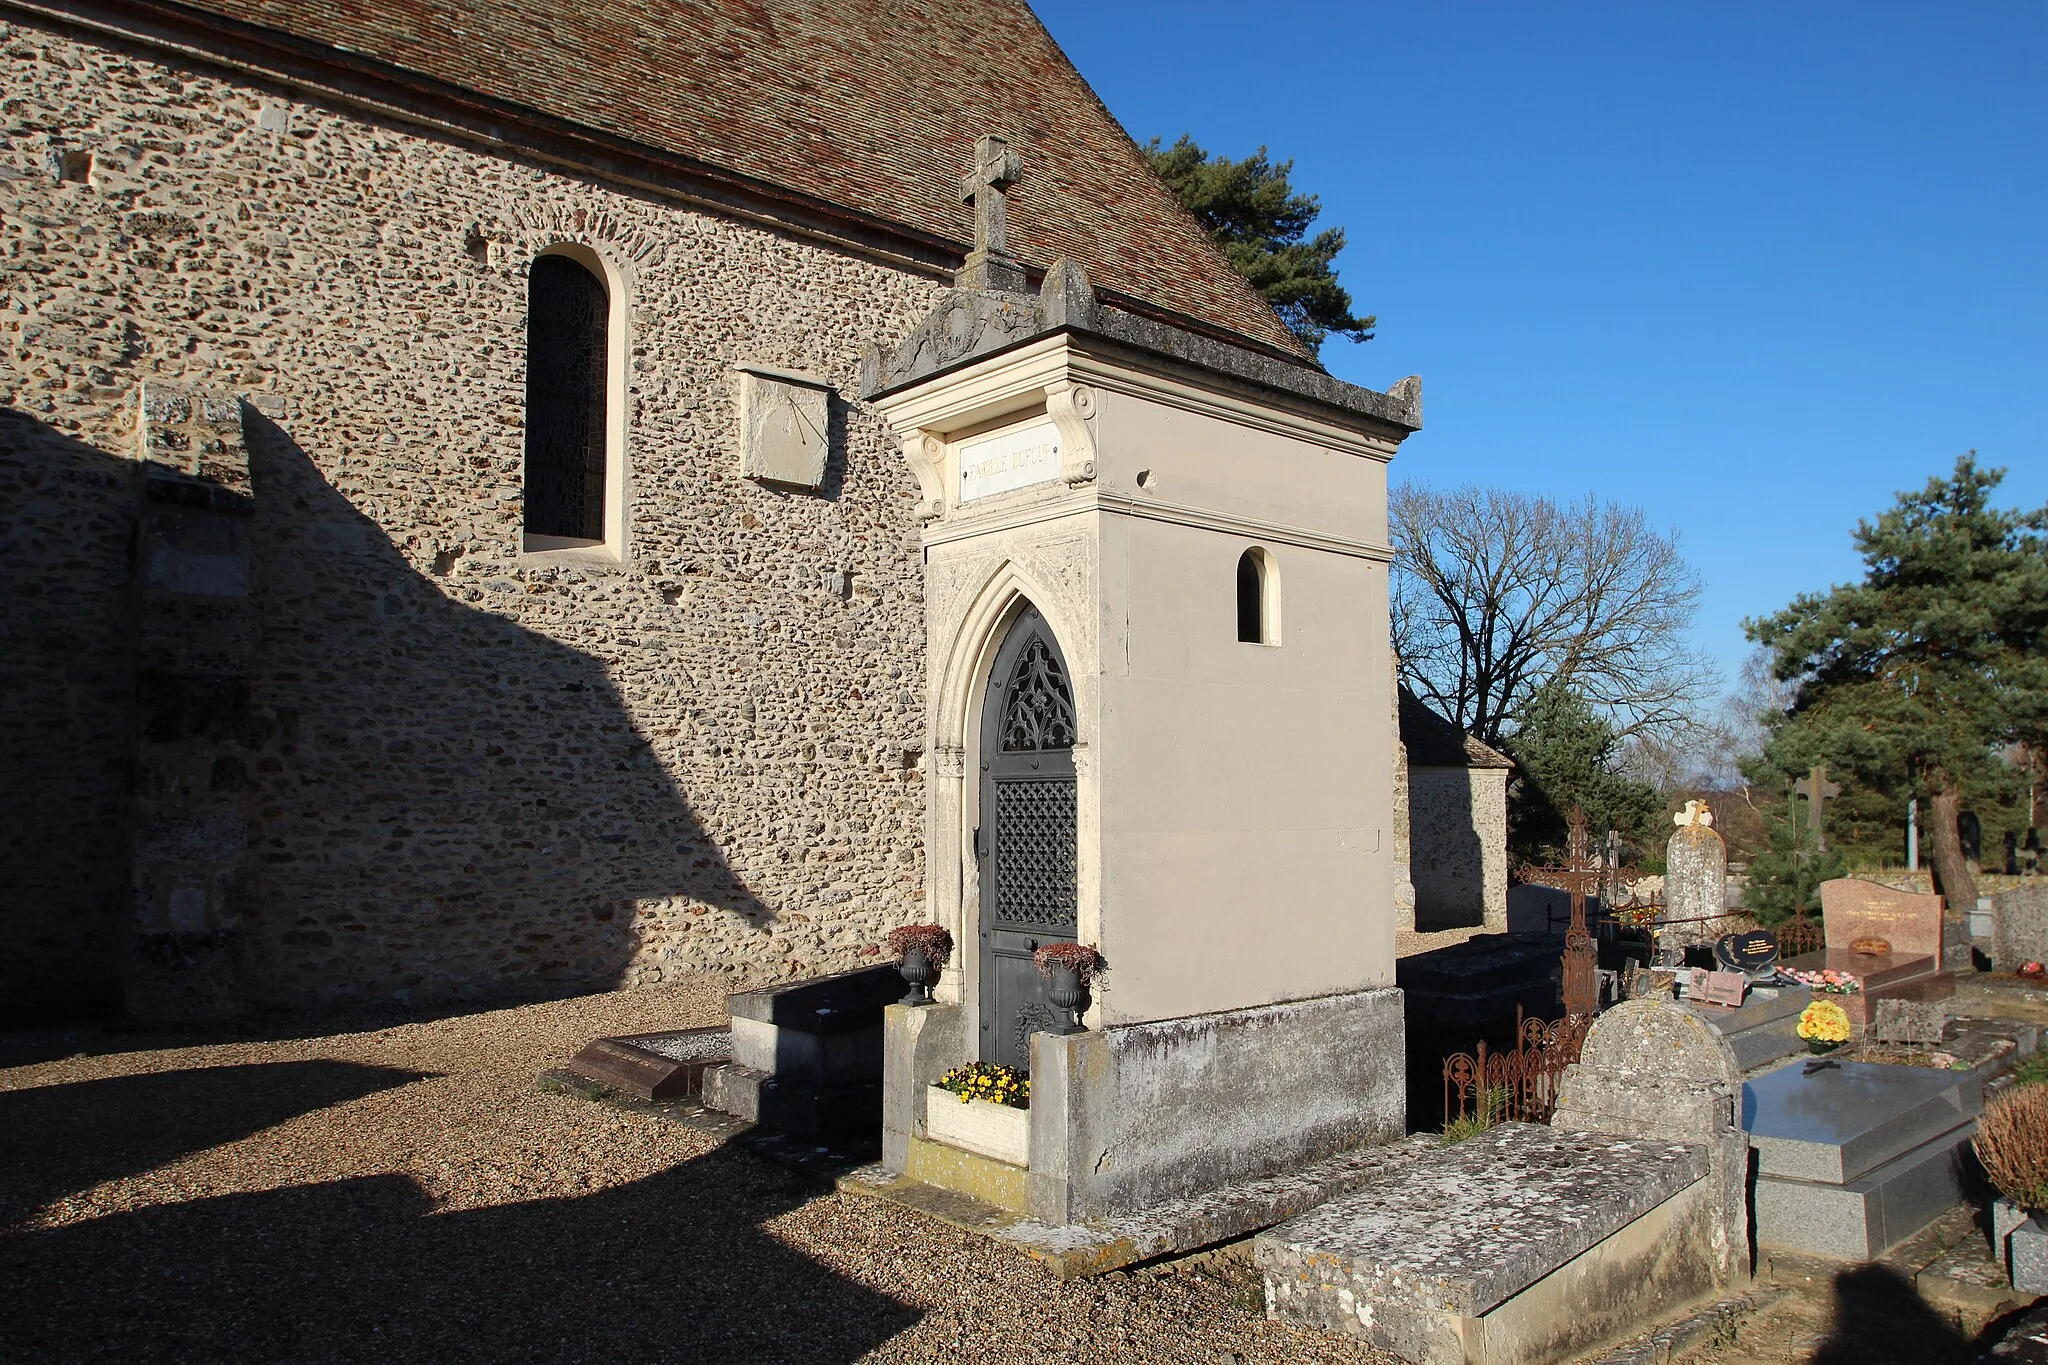 Photo showing: View of the Saint Martin church and cemetery in the village of Grosrouvre, France in march 2014.